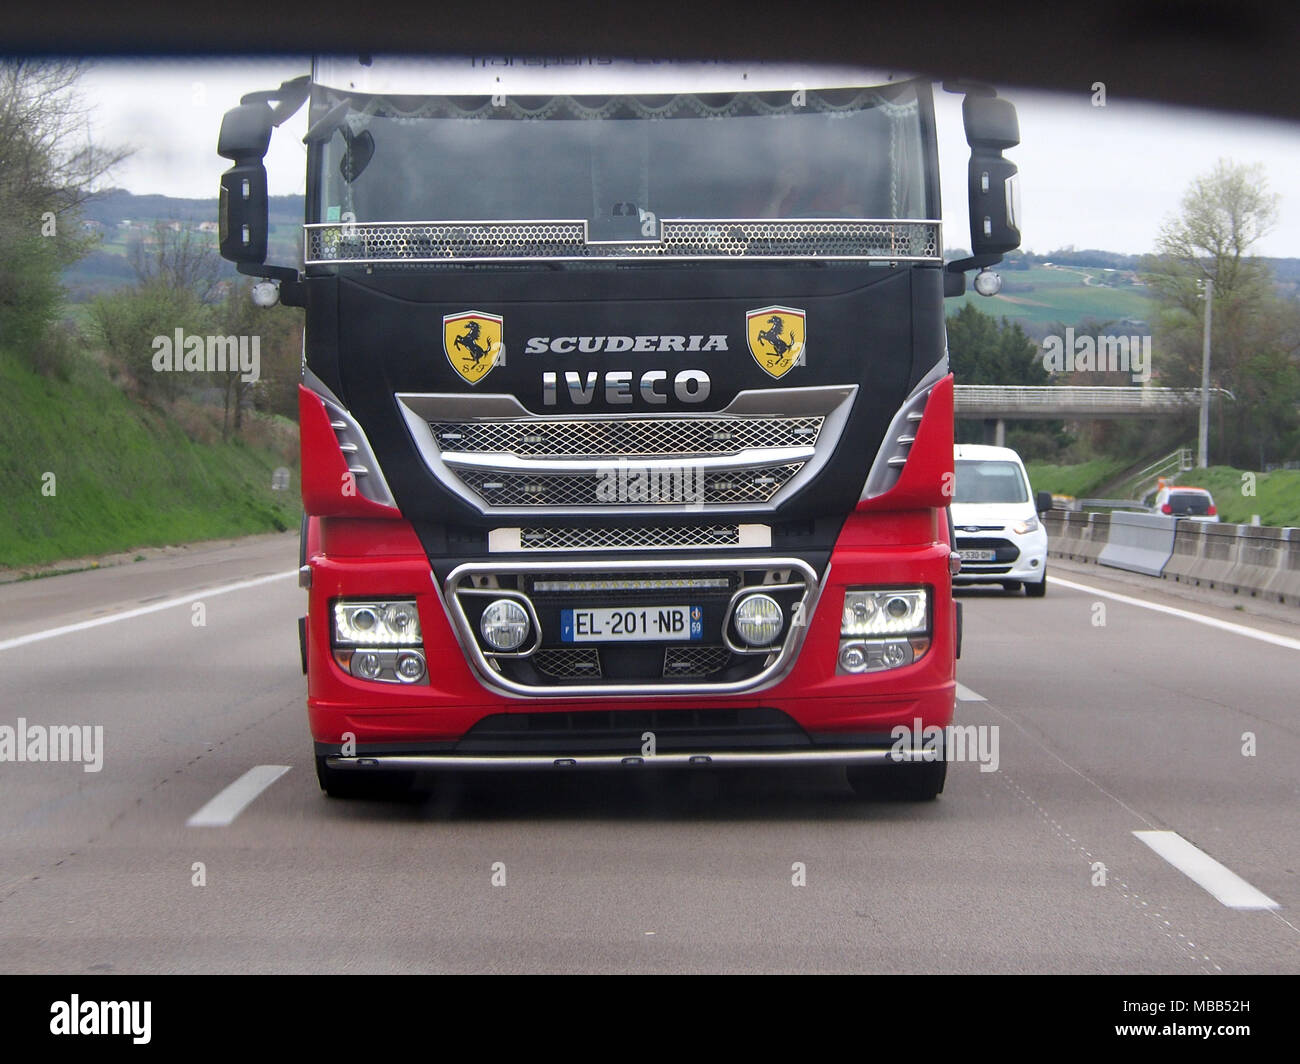 Mornas, France. 9th April, 2018. A Scuderia Ferrari truck was spotted on the A7/E35 motorway (southbound) near Mornas. Scuderia Ferrari  is the official name of the racing division of luxury Italian auto manufacturer, Ferrari, and the racing team that competes in Formula One racing.  (Pics taken from passenger side). Credit: James Bell/Alamy Live News Stock Photo